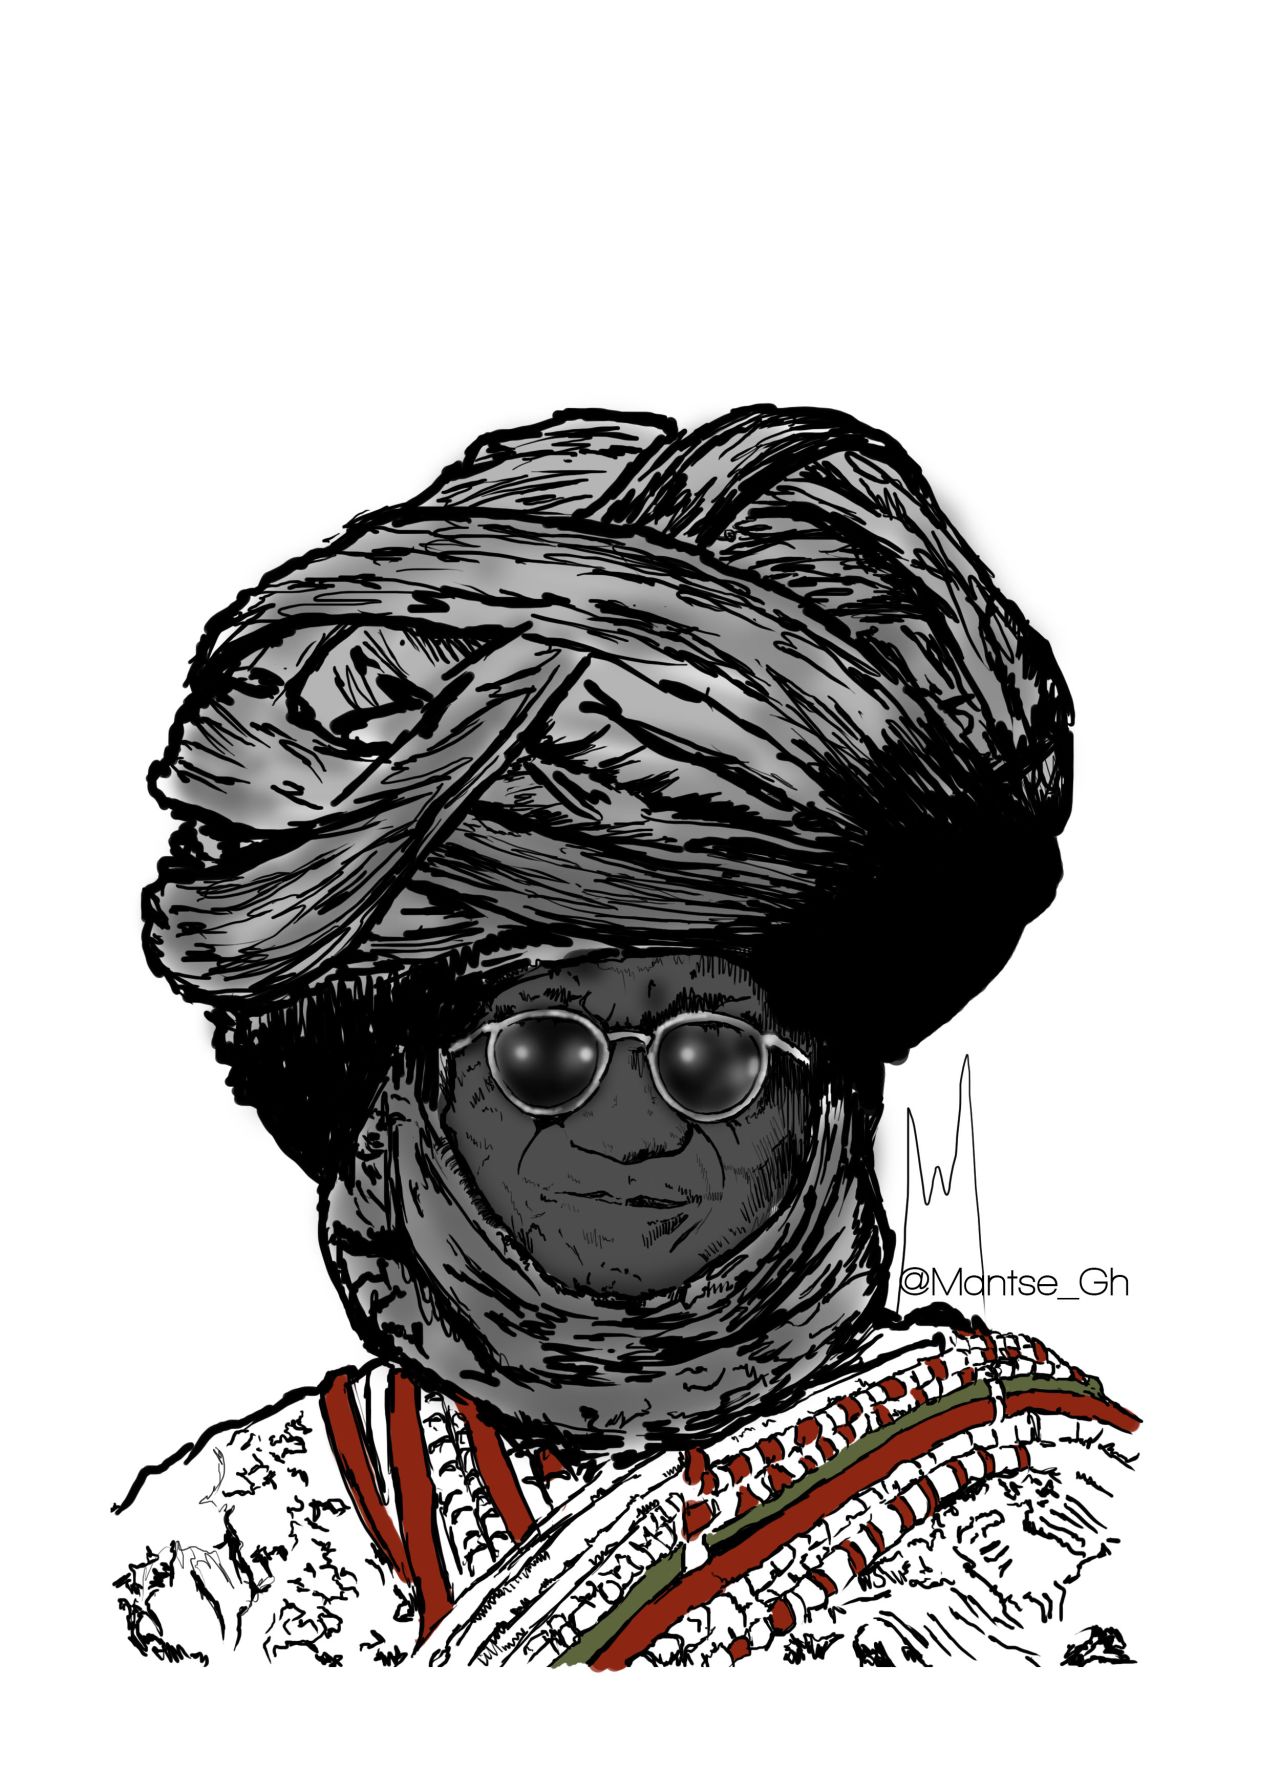 Inktober has helped African artists showcase the best of African art on a global stage